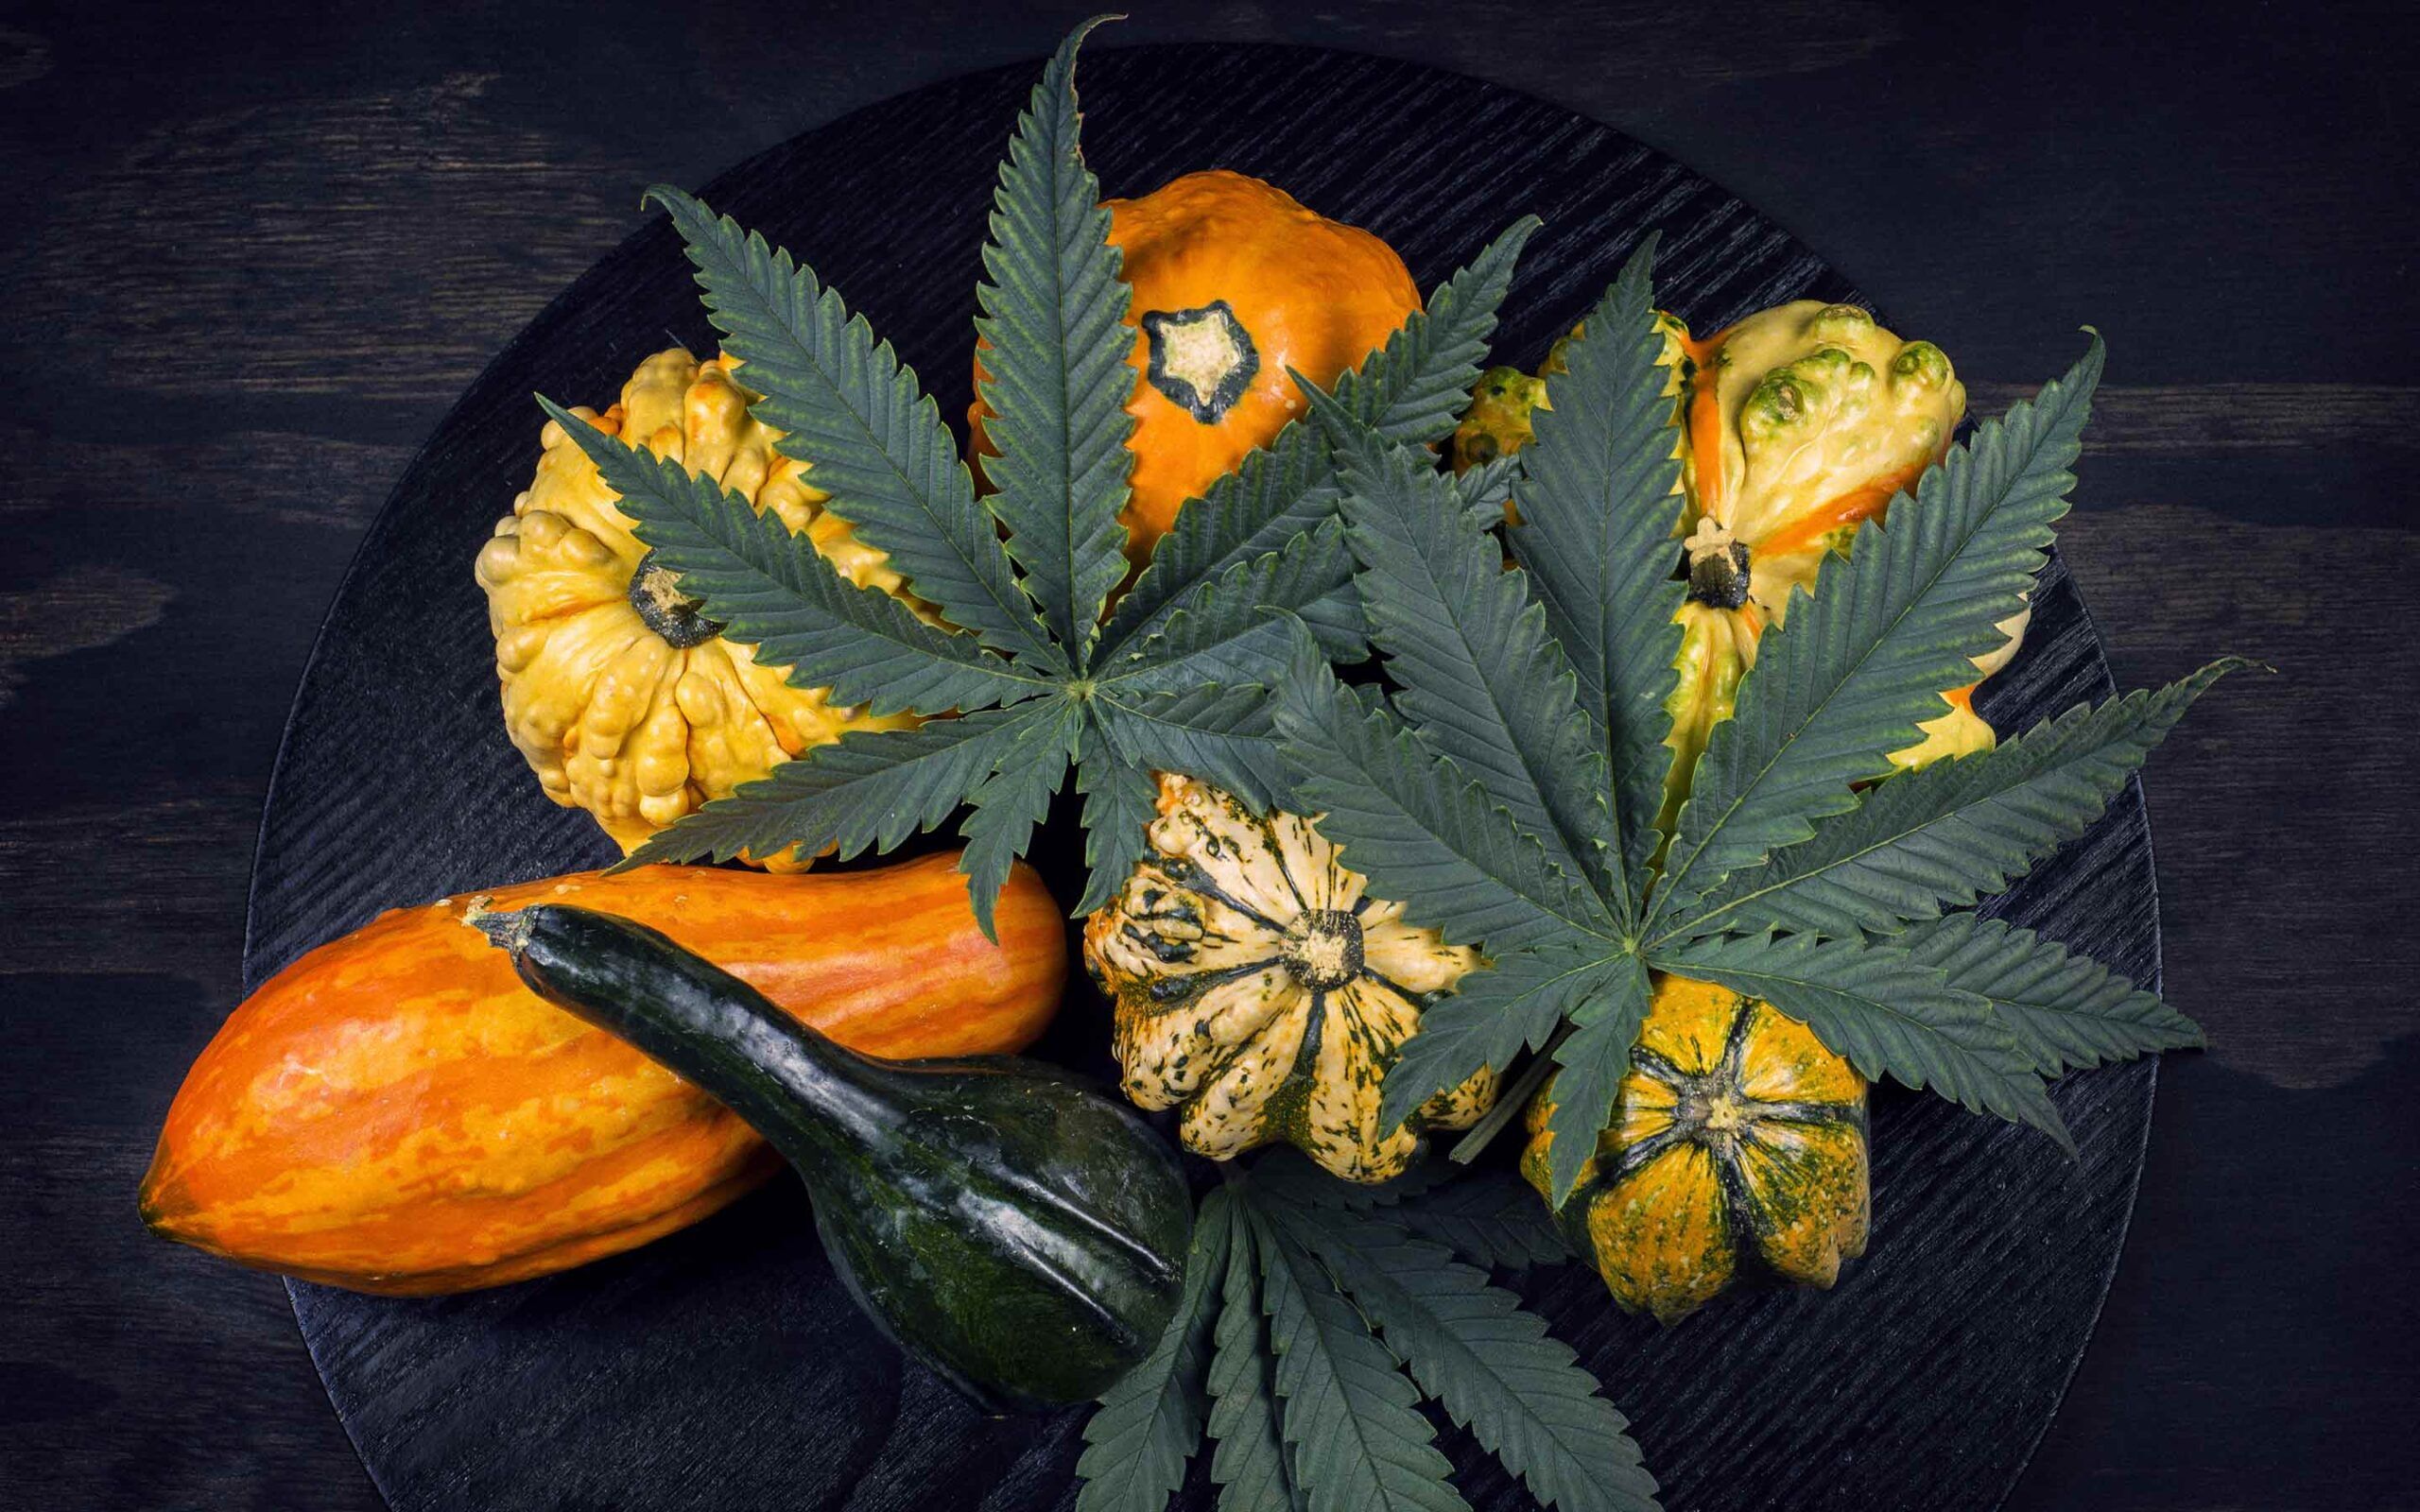 november-2020-photo-contest-featured-image-thanksgiving-cannabis-leaves-and-autumn-squash